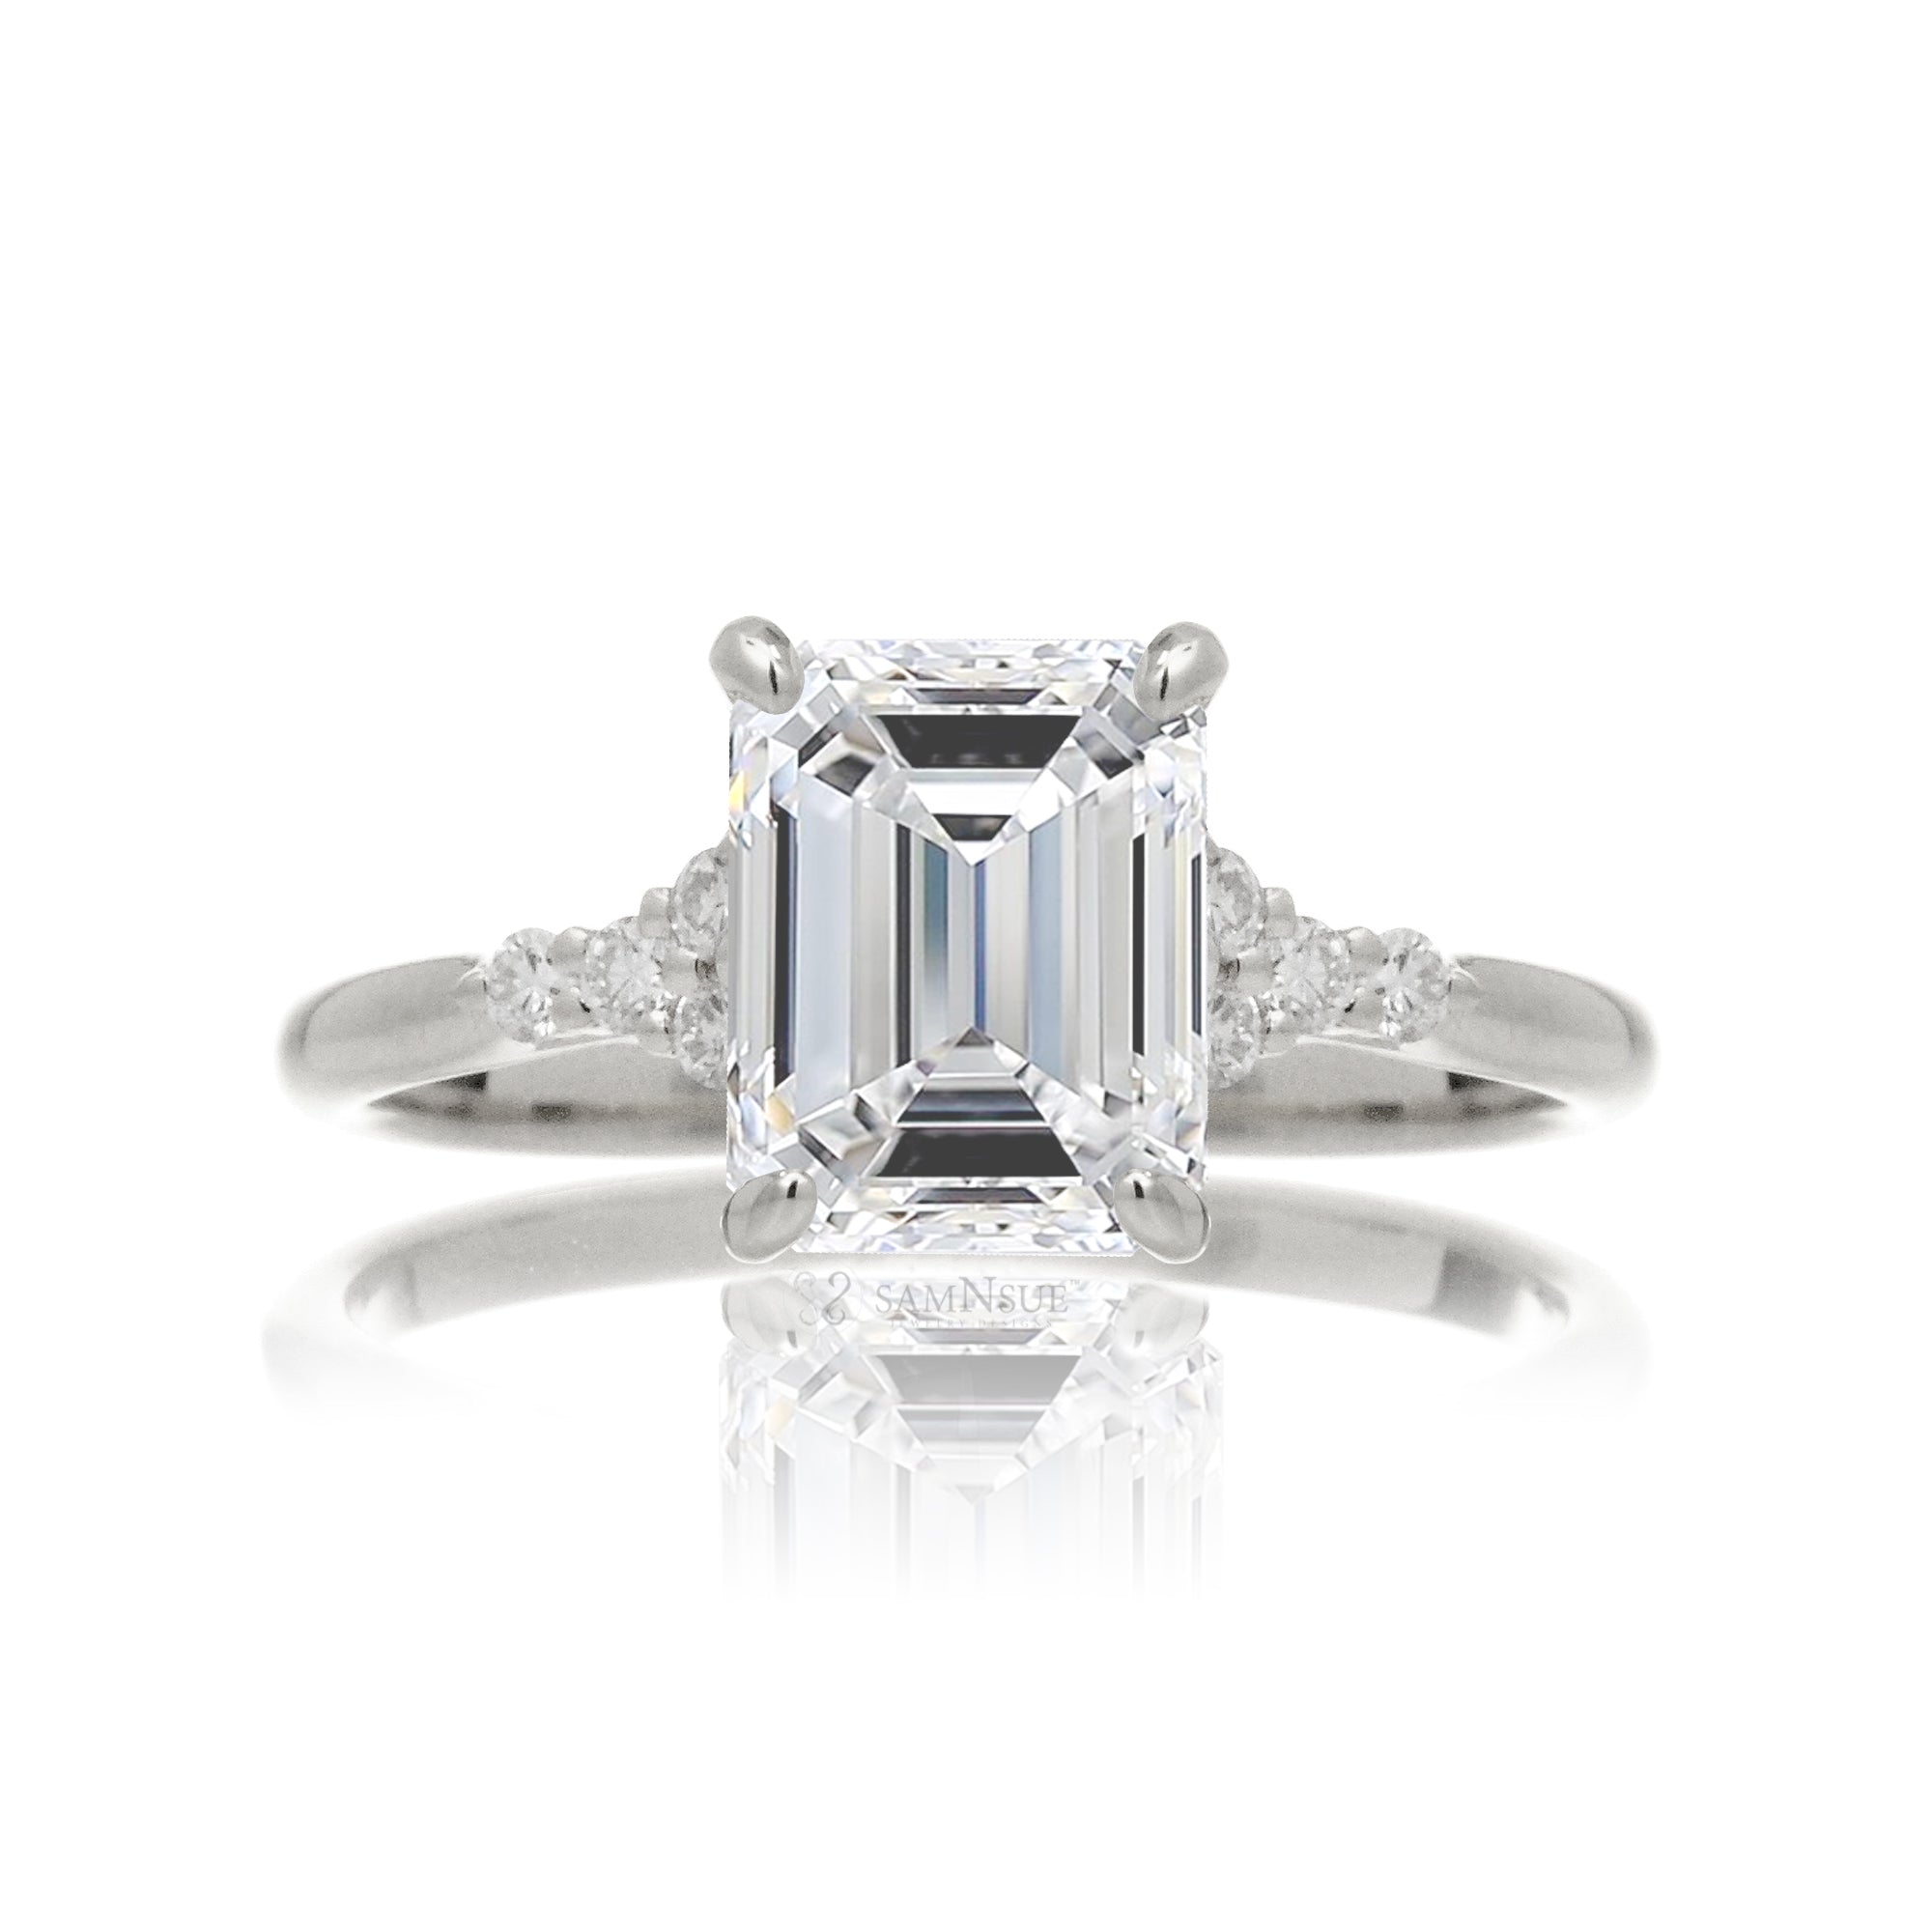 Emerald step cut diamond engagement ring in white gold